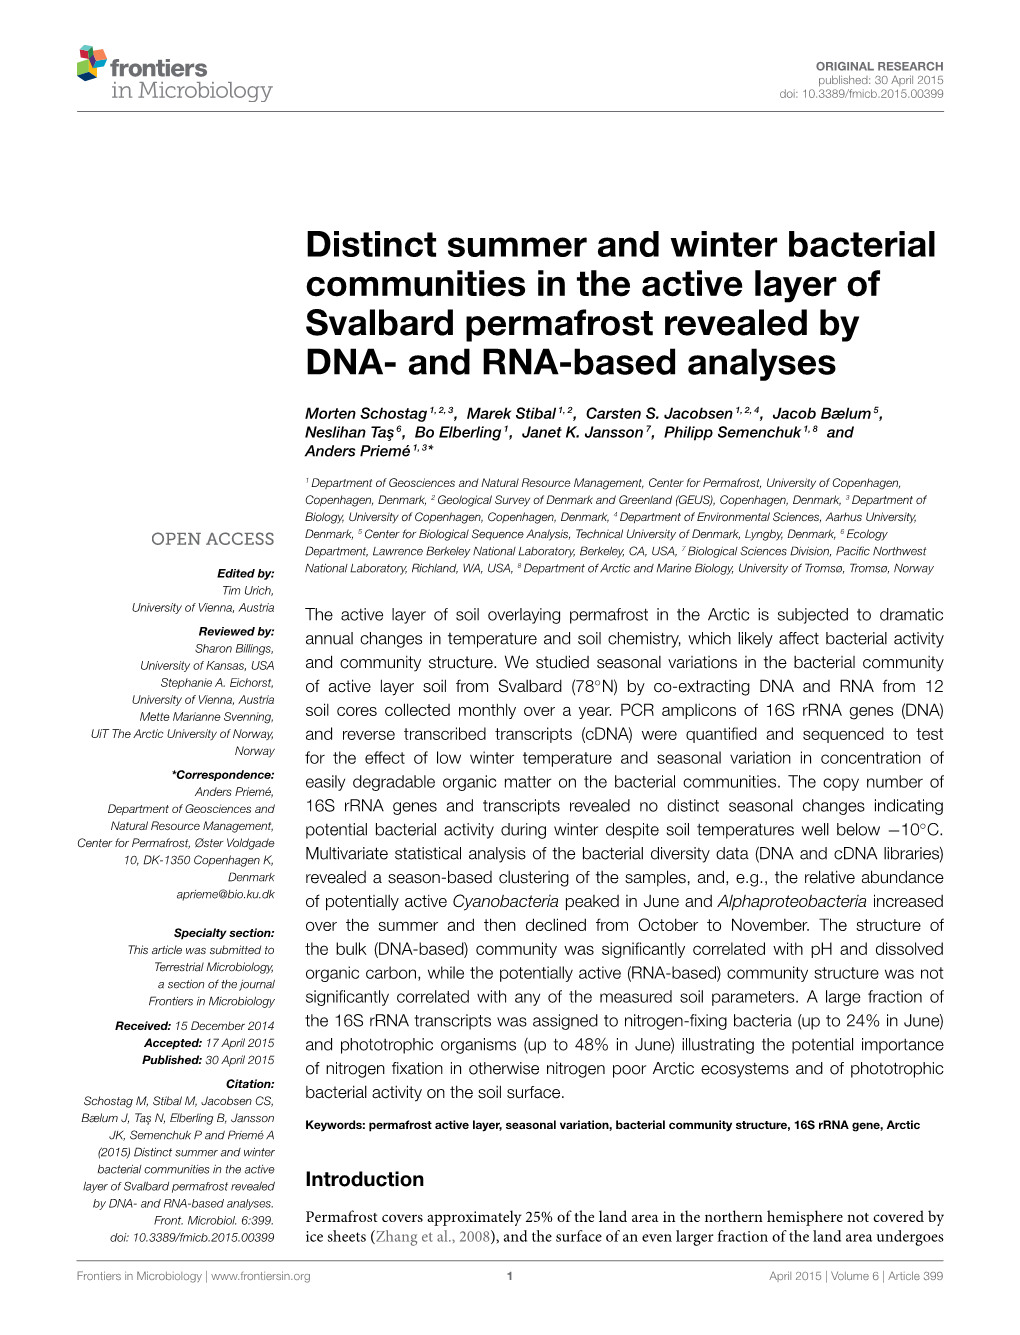 Distinct Summer and Winter Bacterial Communities in the Active Layer of Svalbard Permafrost Revealed by DNA- and RNA-Based Analyses